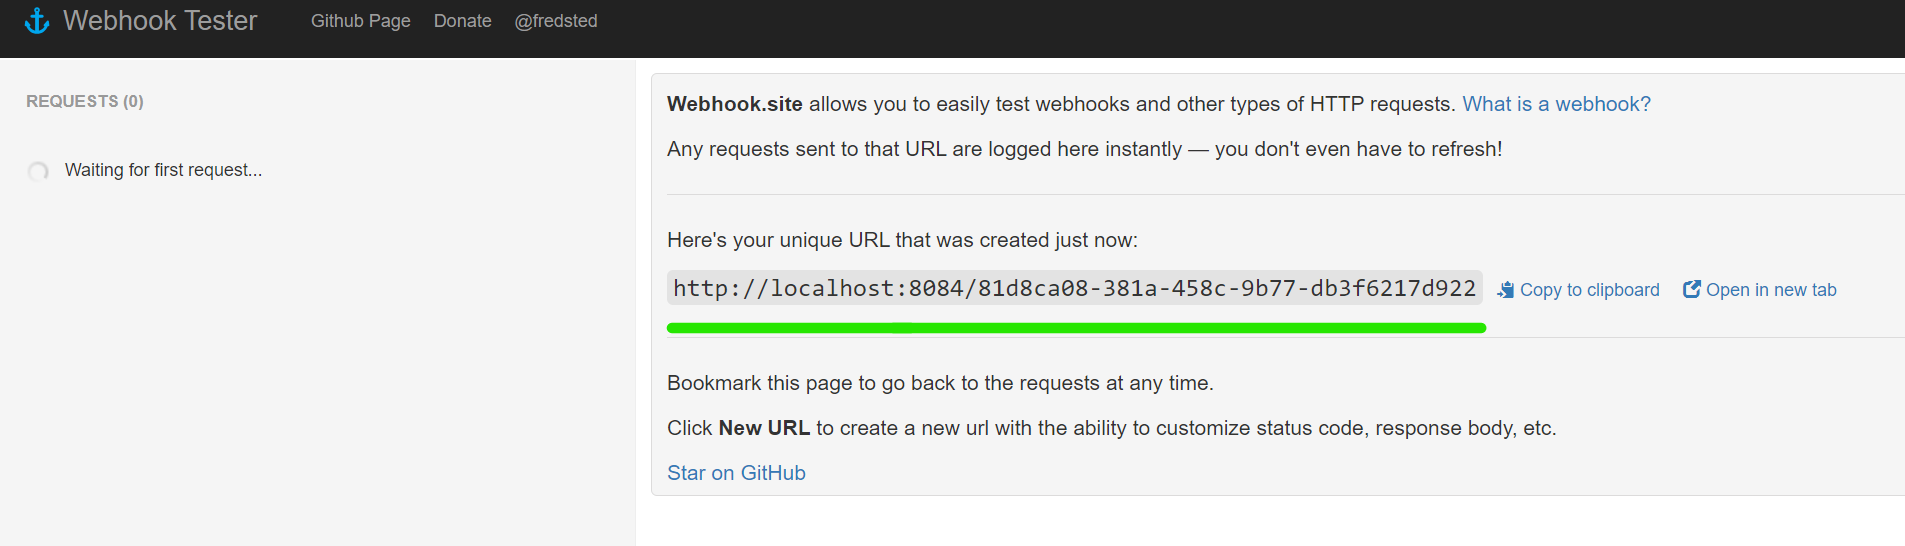 webhook.site page